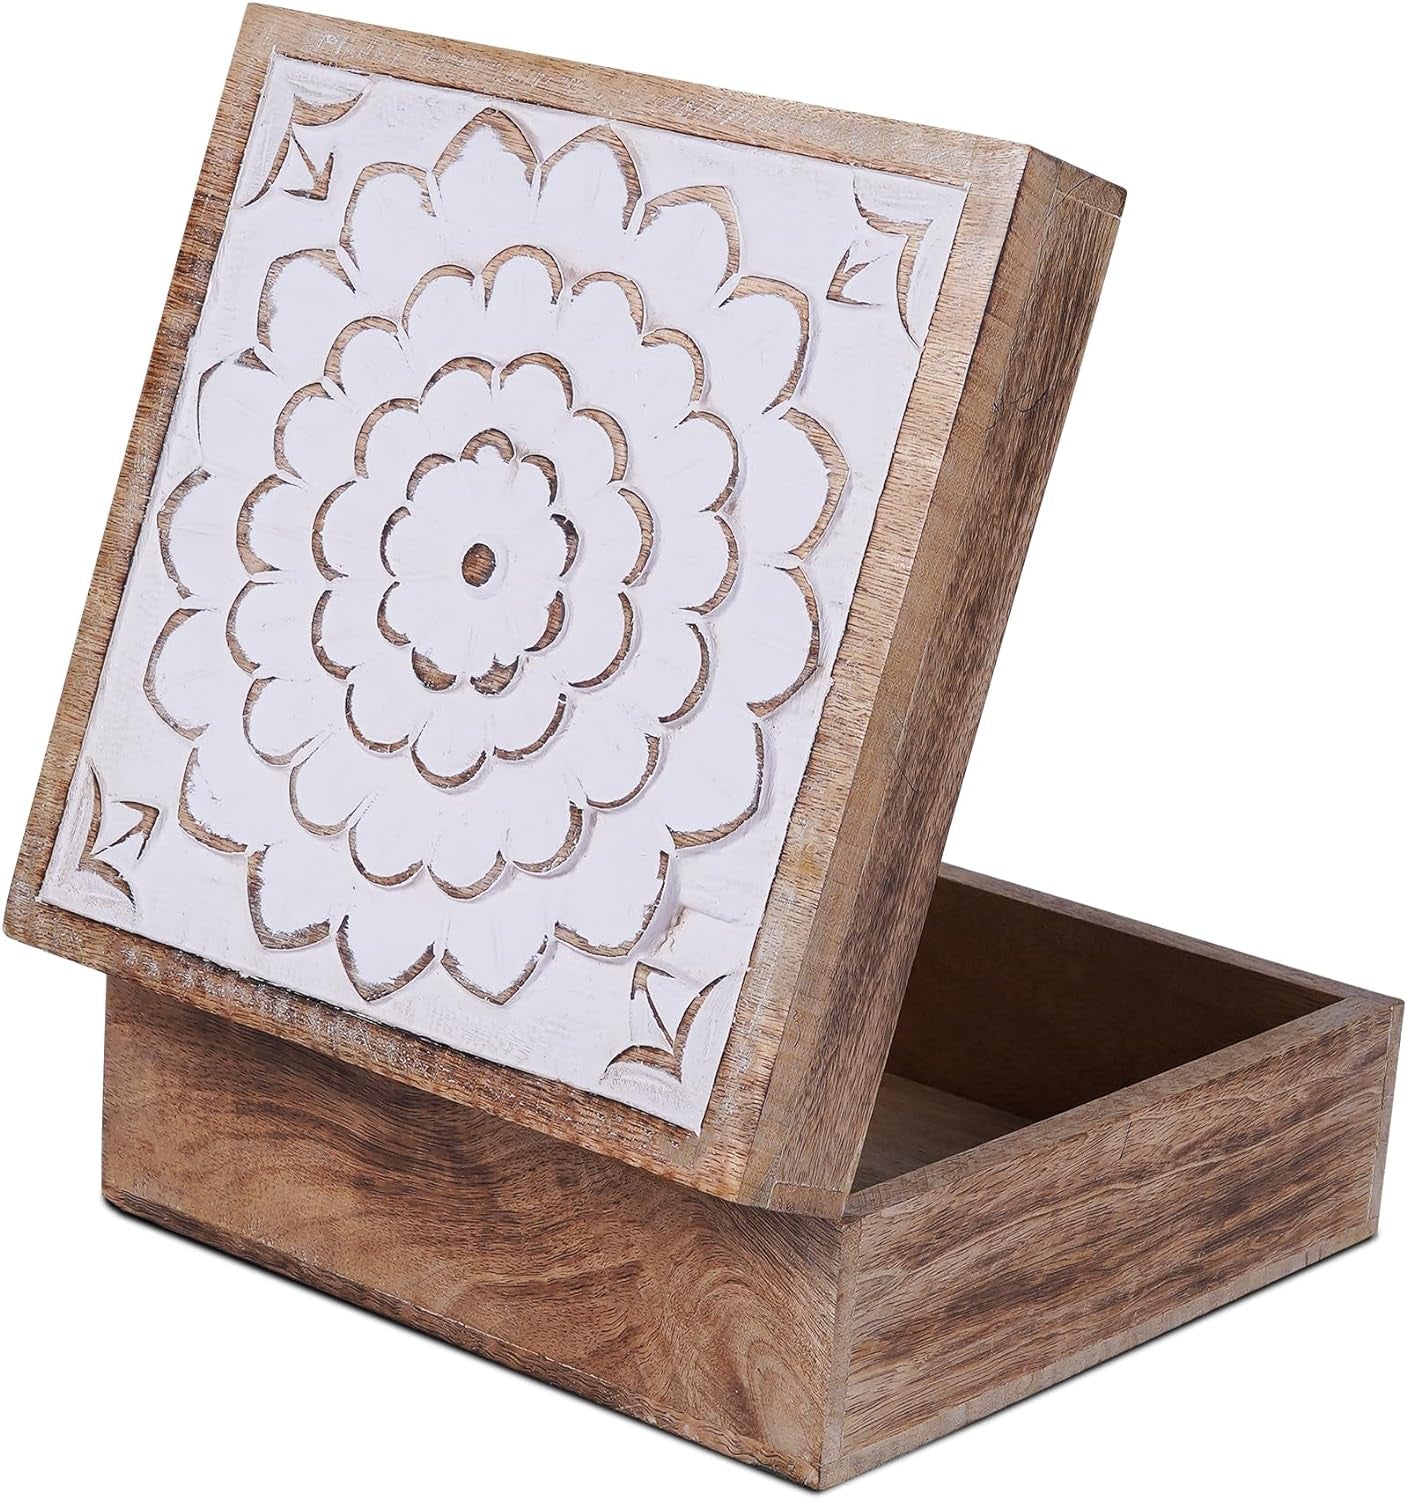 Mela Artisans Blossom Wooden Box - Natural Distressed Gold Decorative Box W/Felt Pads underneath & Wooden Carving - Unique Handmade Mangowood Keepsake Storage Box for Home - 9” X 9” X 4”